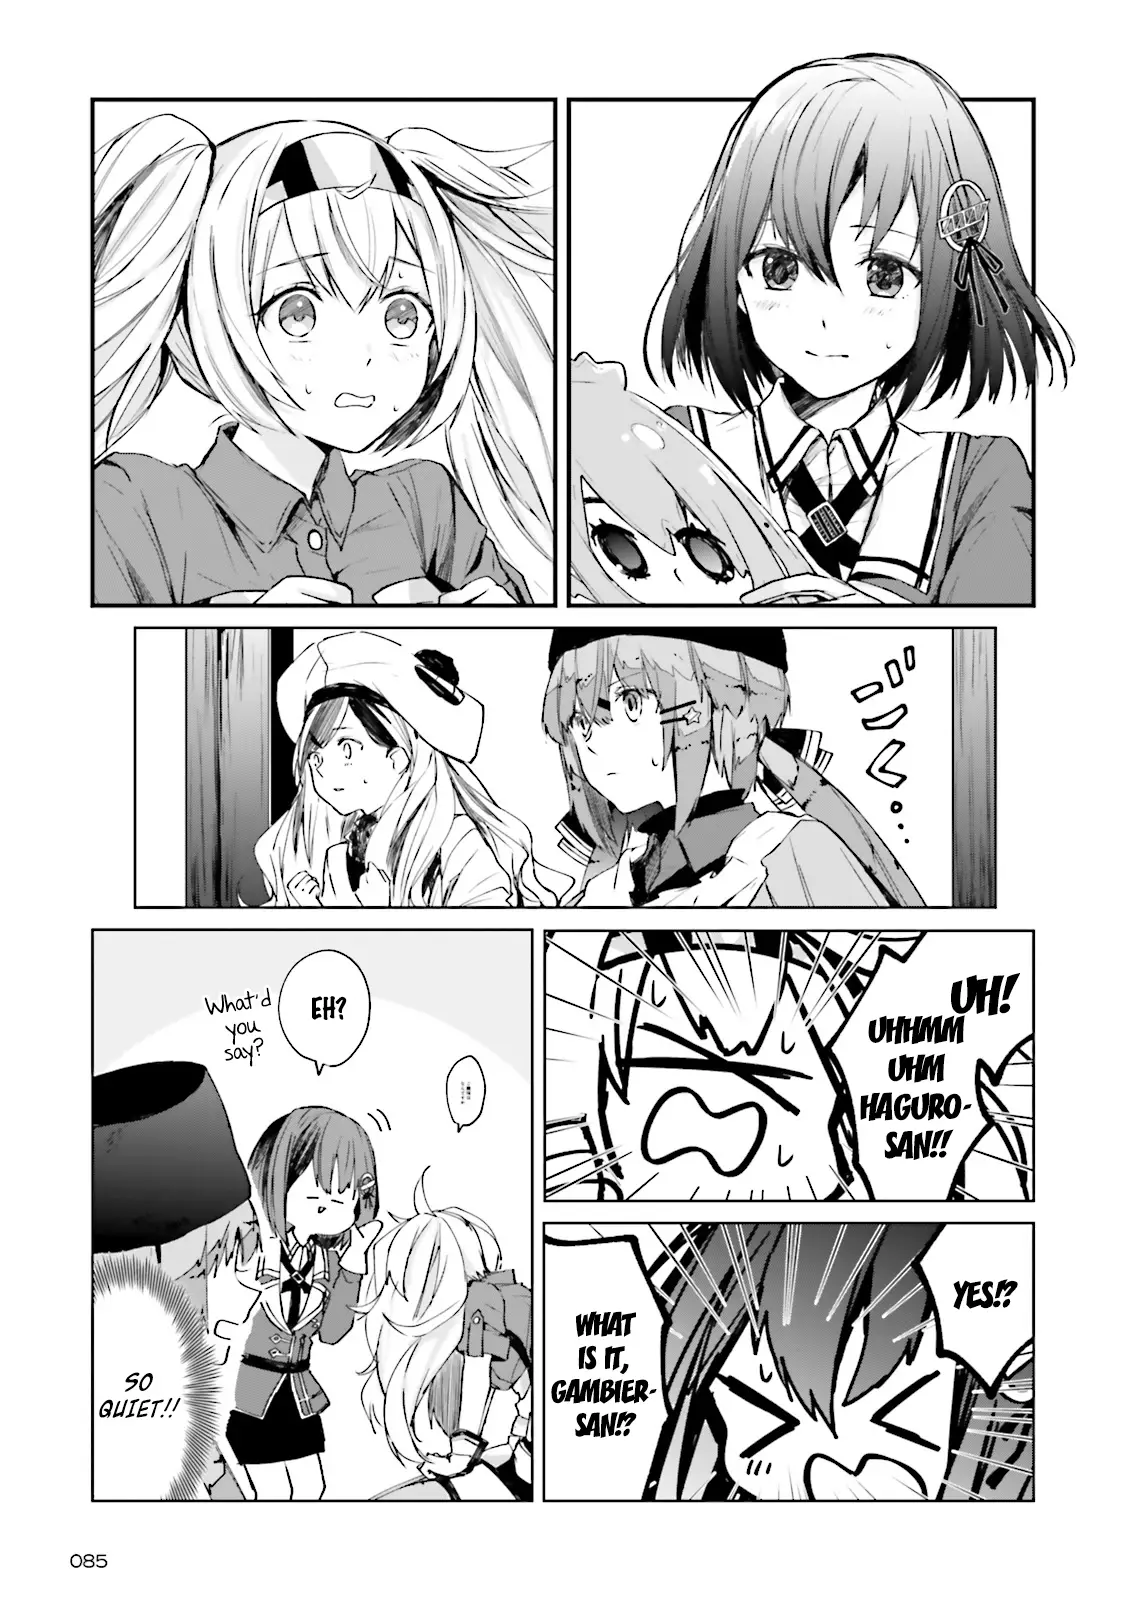 Kantai Collection -Kancolle- Tonight, Another "salute"! - 2 page 20